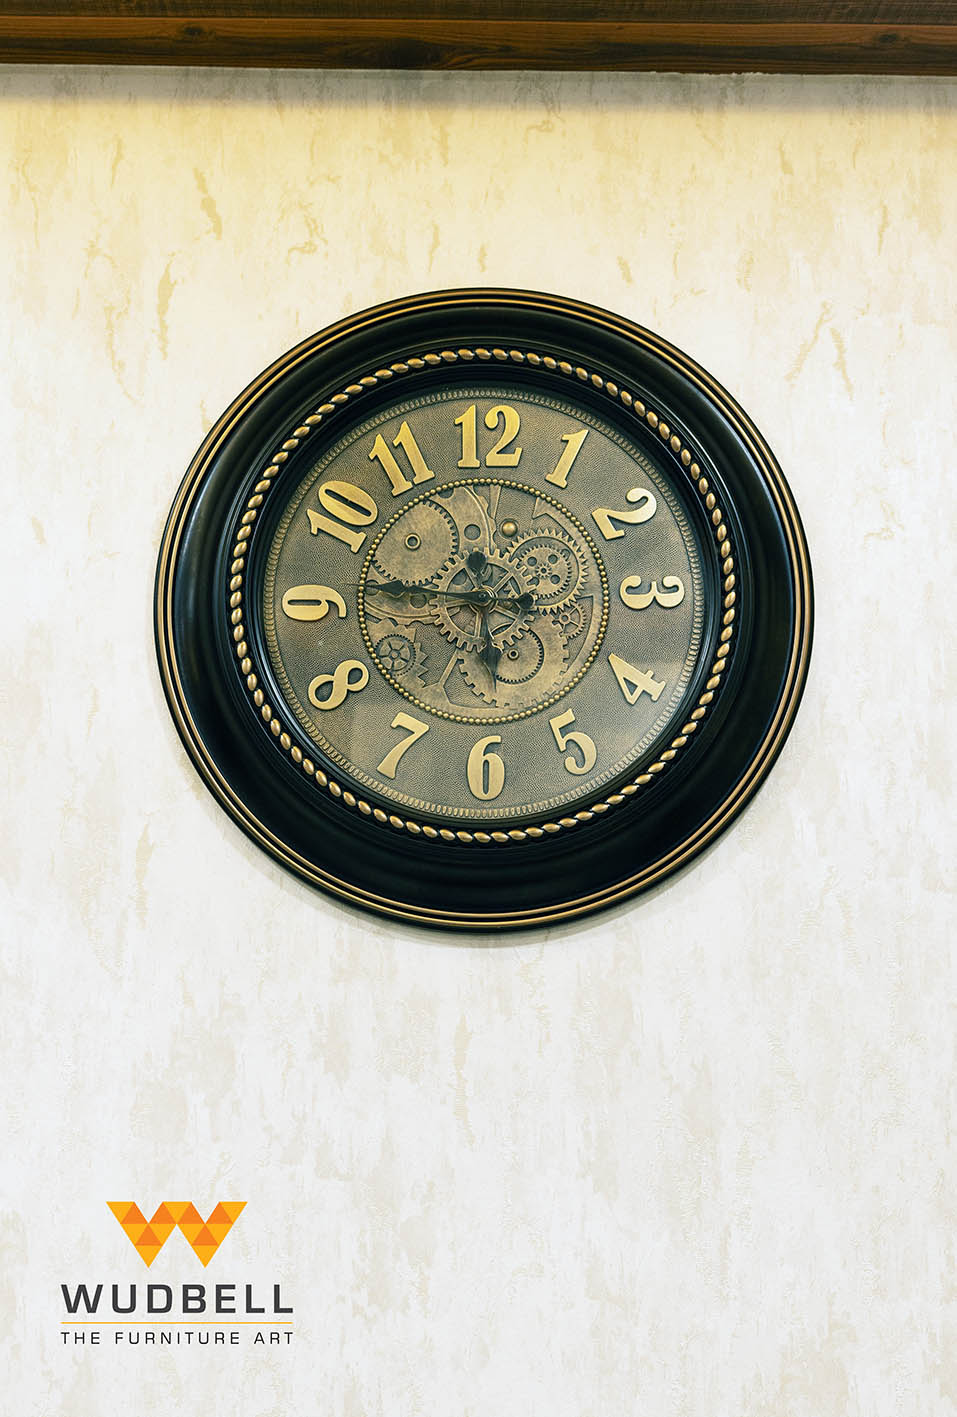 The vintage wall clock